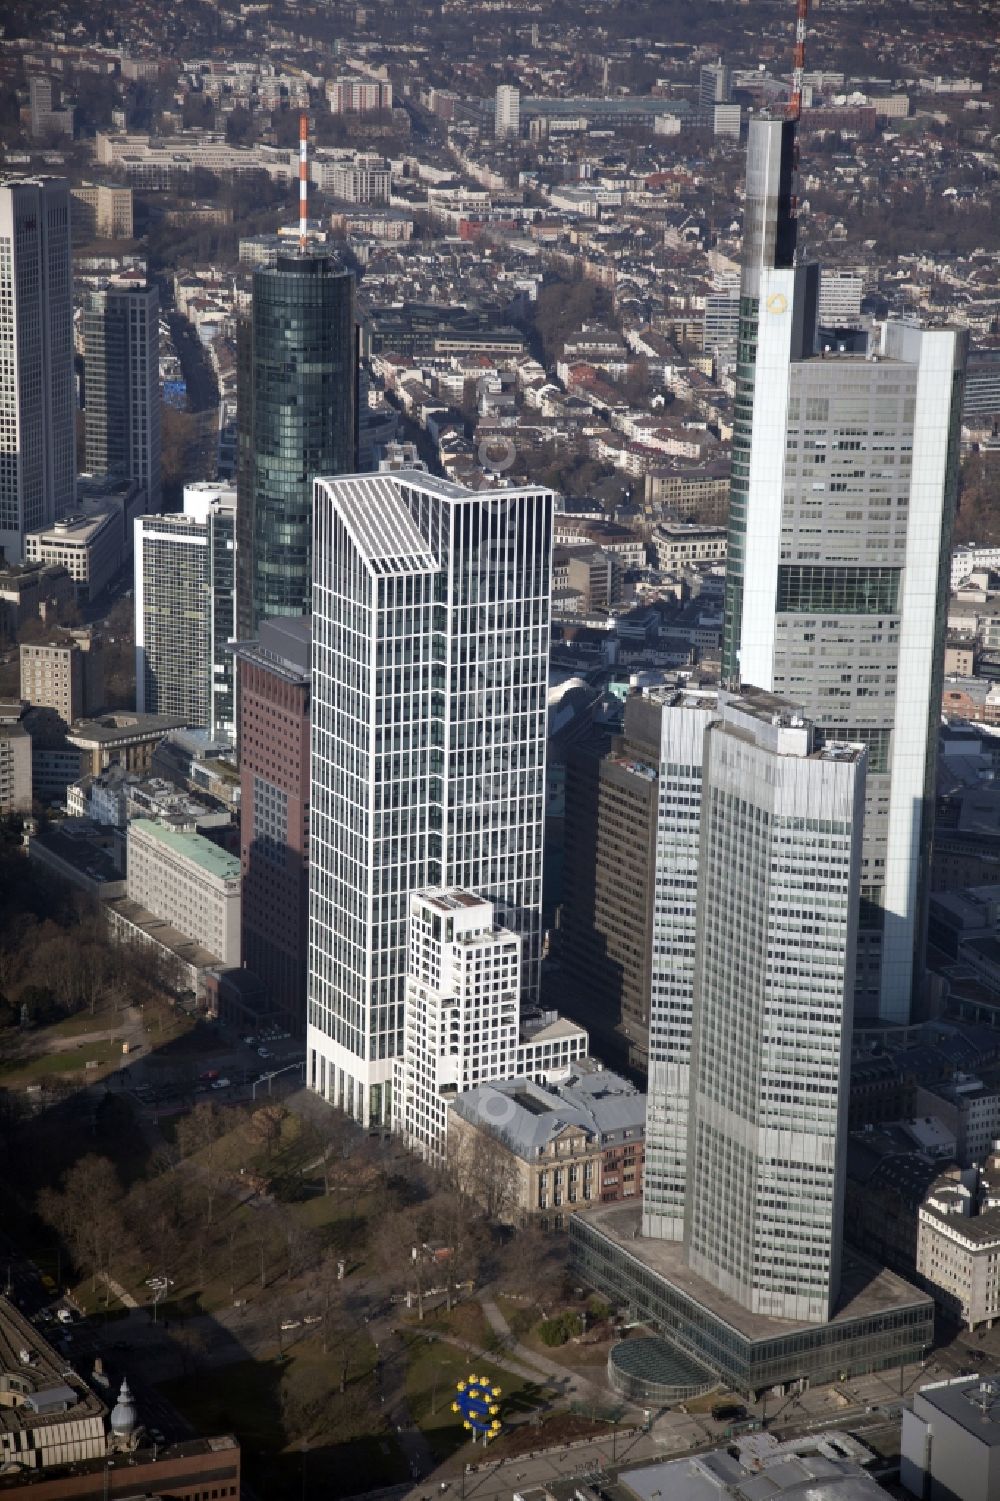 Aerial photograph Frankfurt am Main - High-rise buildings in Frankfurt am Main in the state Hesse. The Eurotower (front) and other high-rise buildings at the Willy- Brandt-Platz next to the Gallusanlage. The Eurotower was first used by the Bank for the Economy (BfG) and then used by the European Central Bank (ECB). According to the plans of the ECB, the Eurotower will become the seat of the Single Supervisory Authority (SSM) in the future